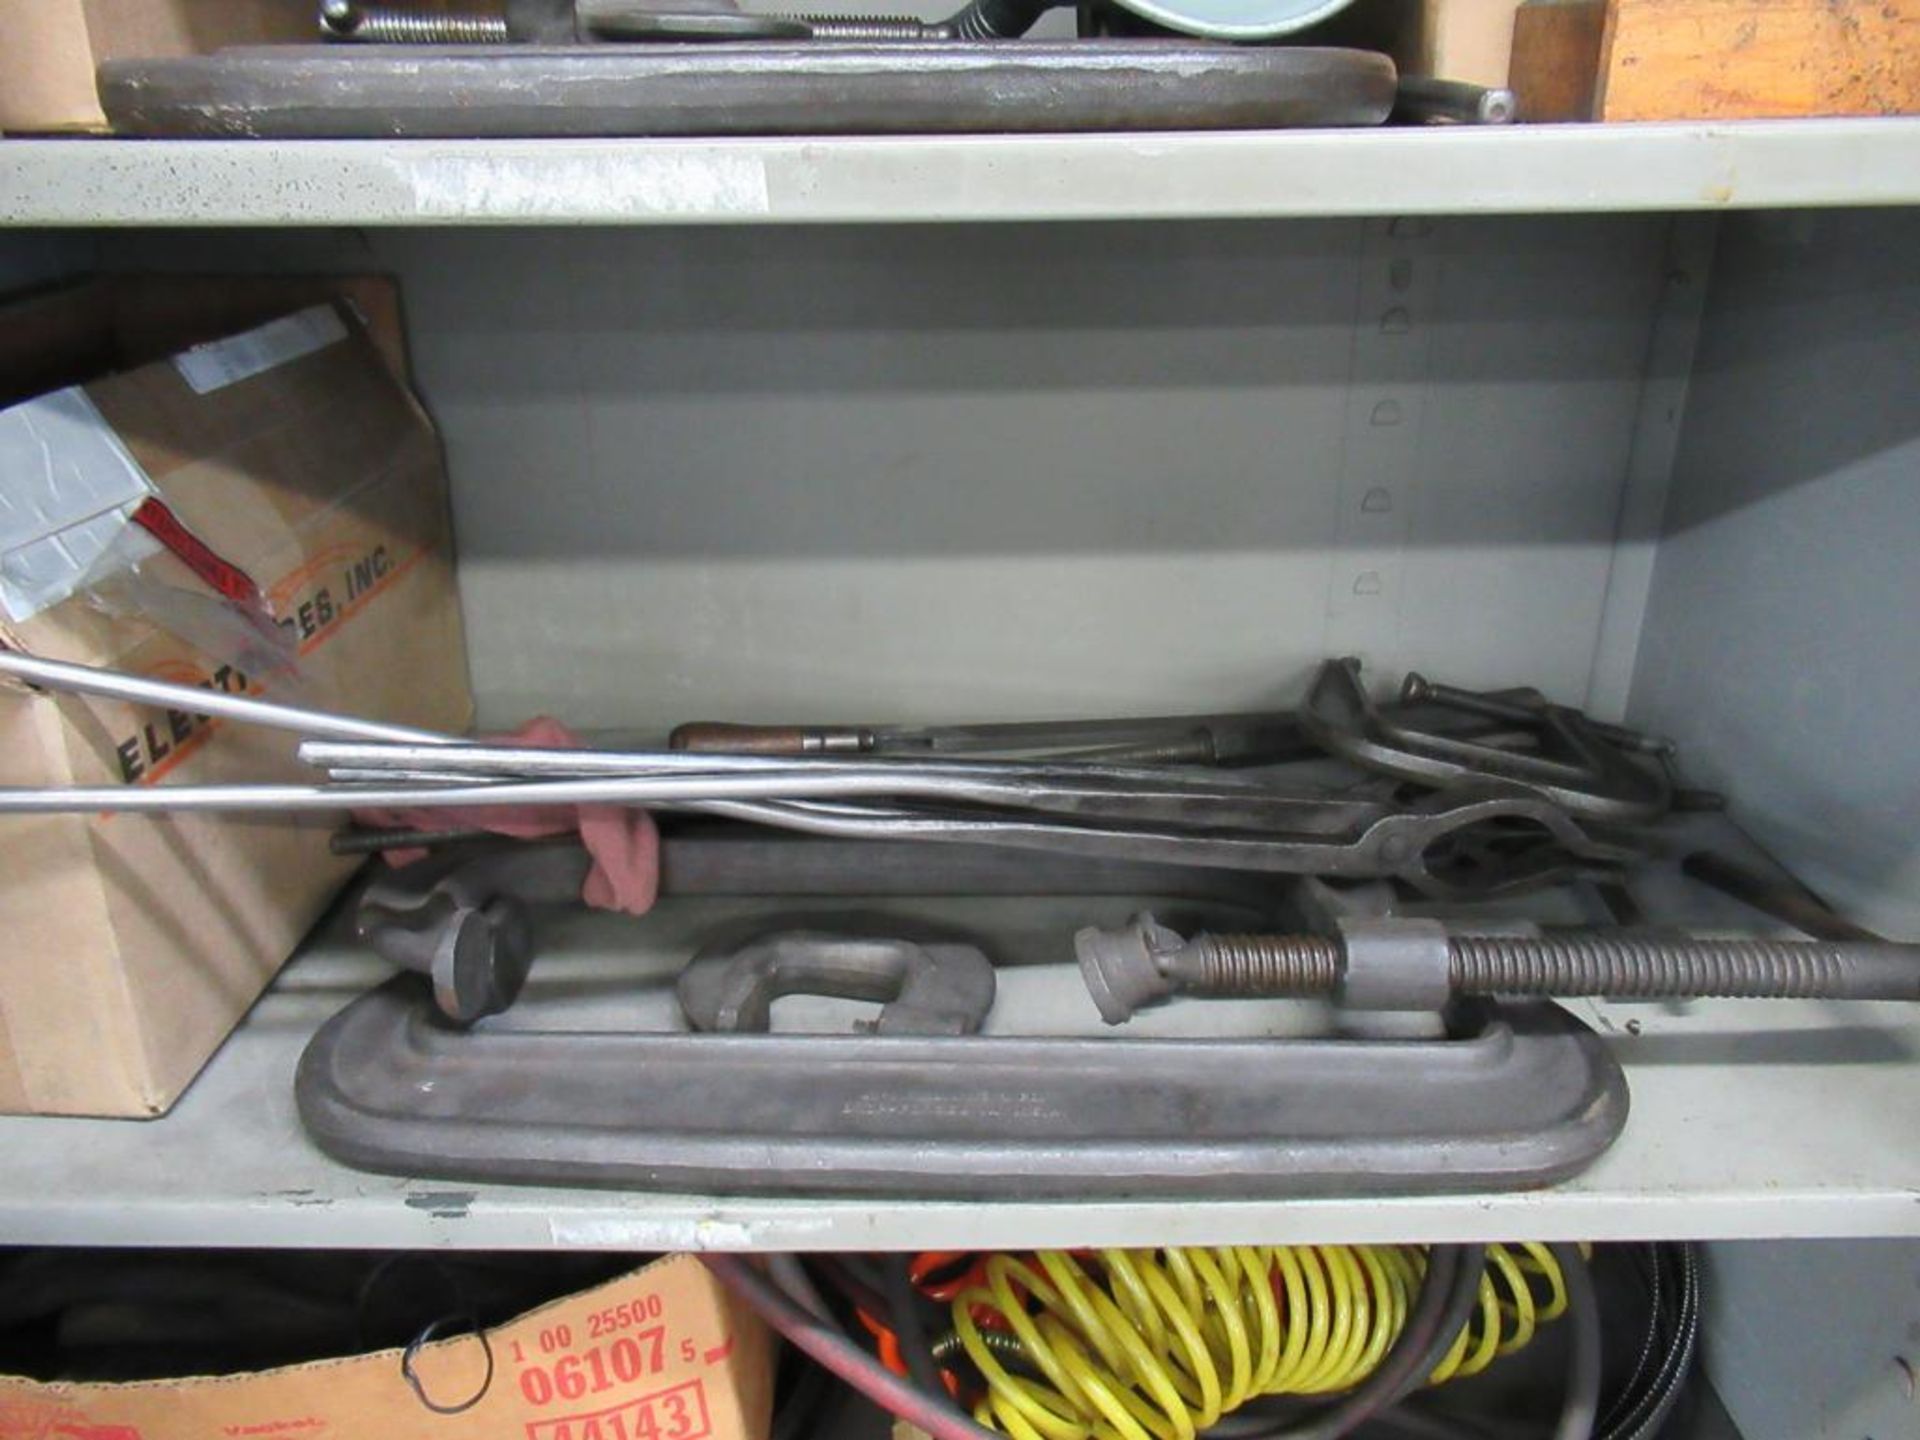 LOT: Cabinet w/Contents of C-Clamps, Spring Clamps, Air Hose, etc. - Image 5 of 8